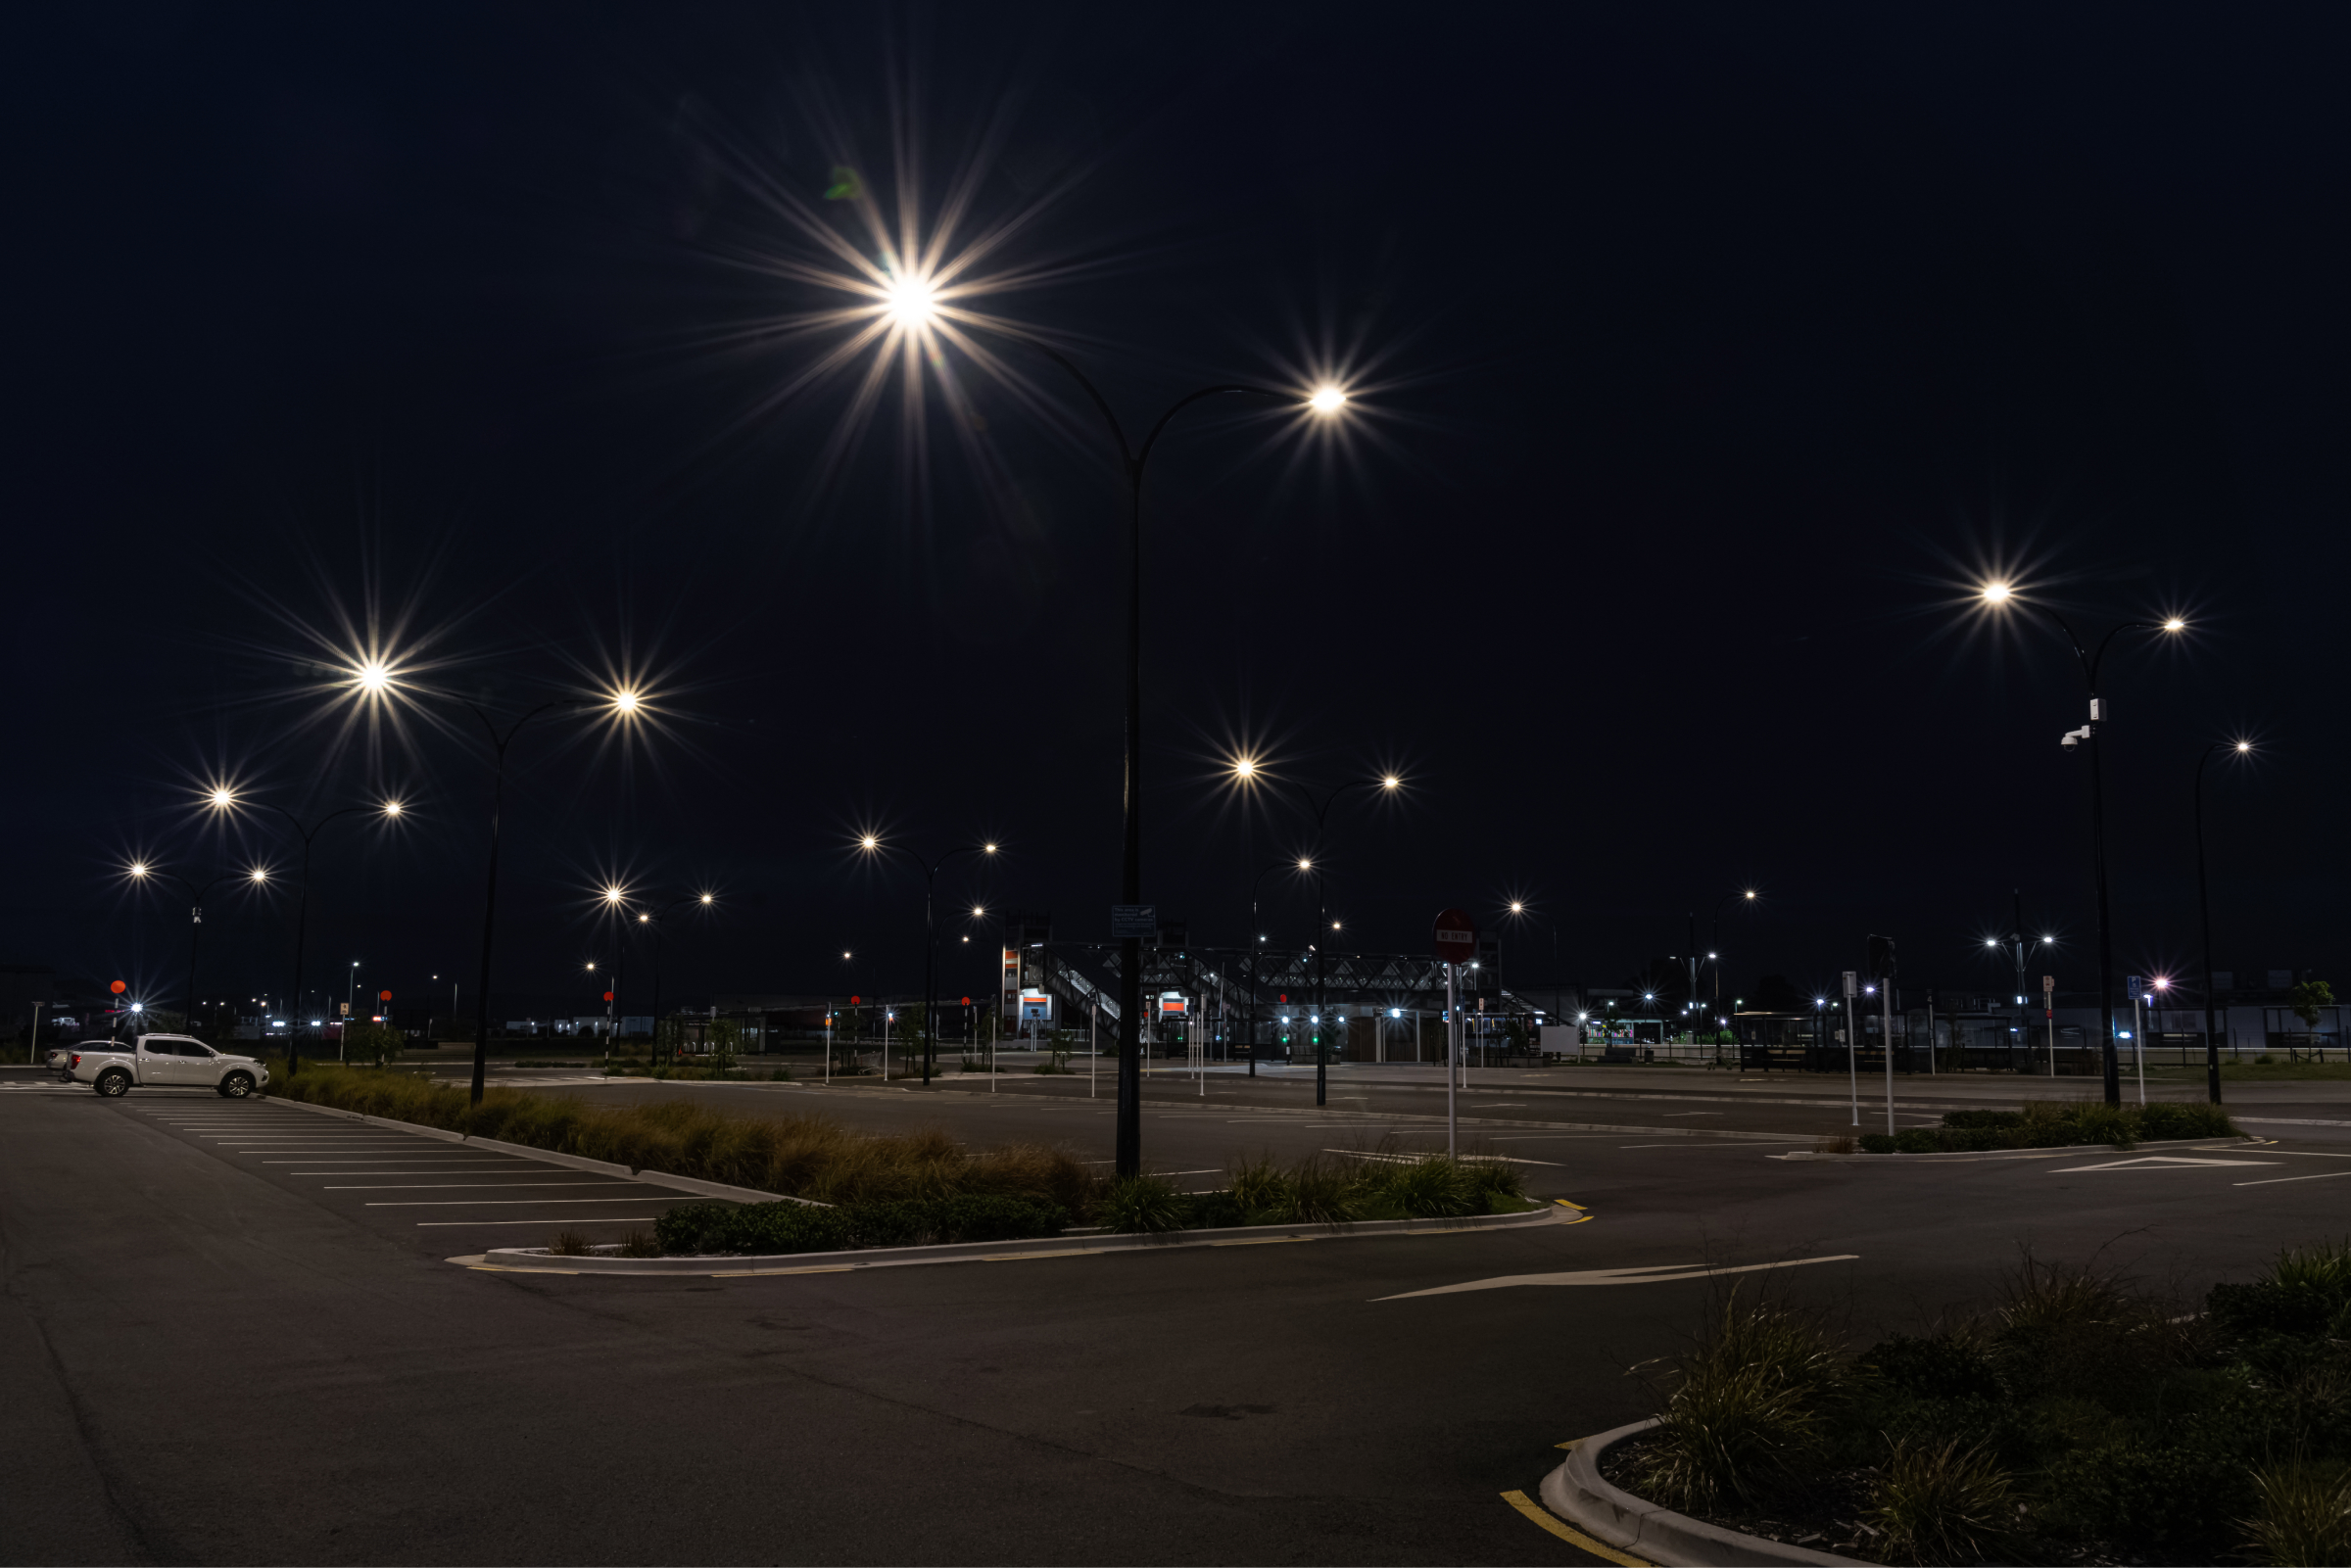 Street lights in a parking lot at night, powered by Ibex lighting.